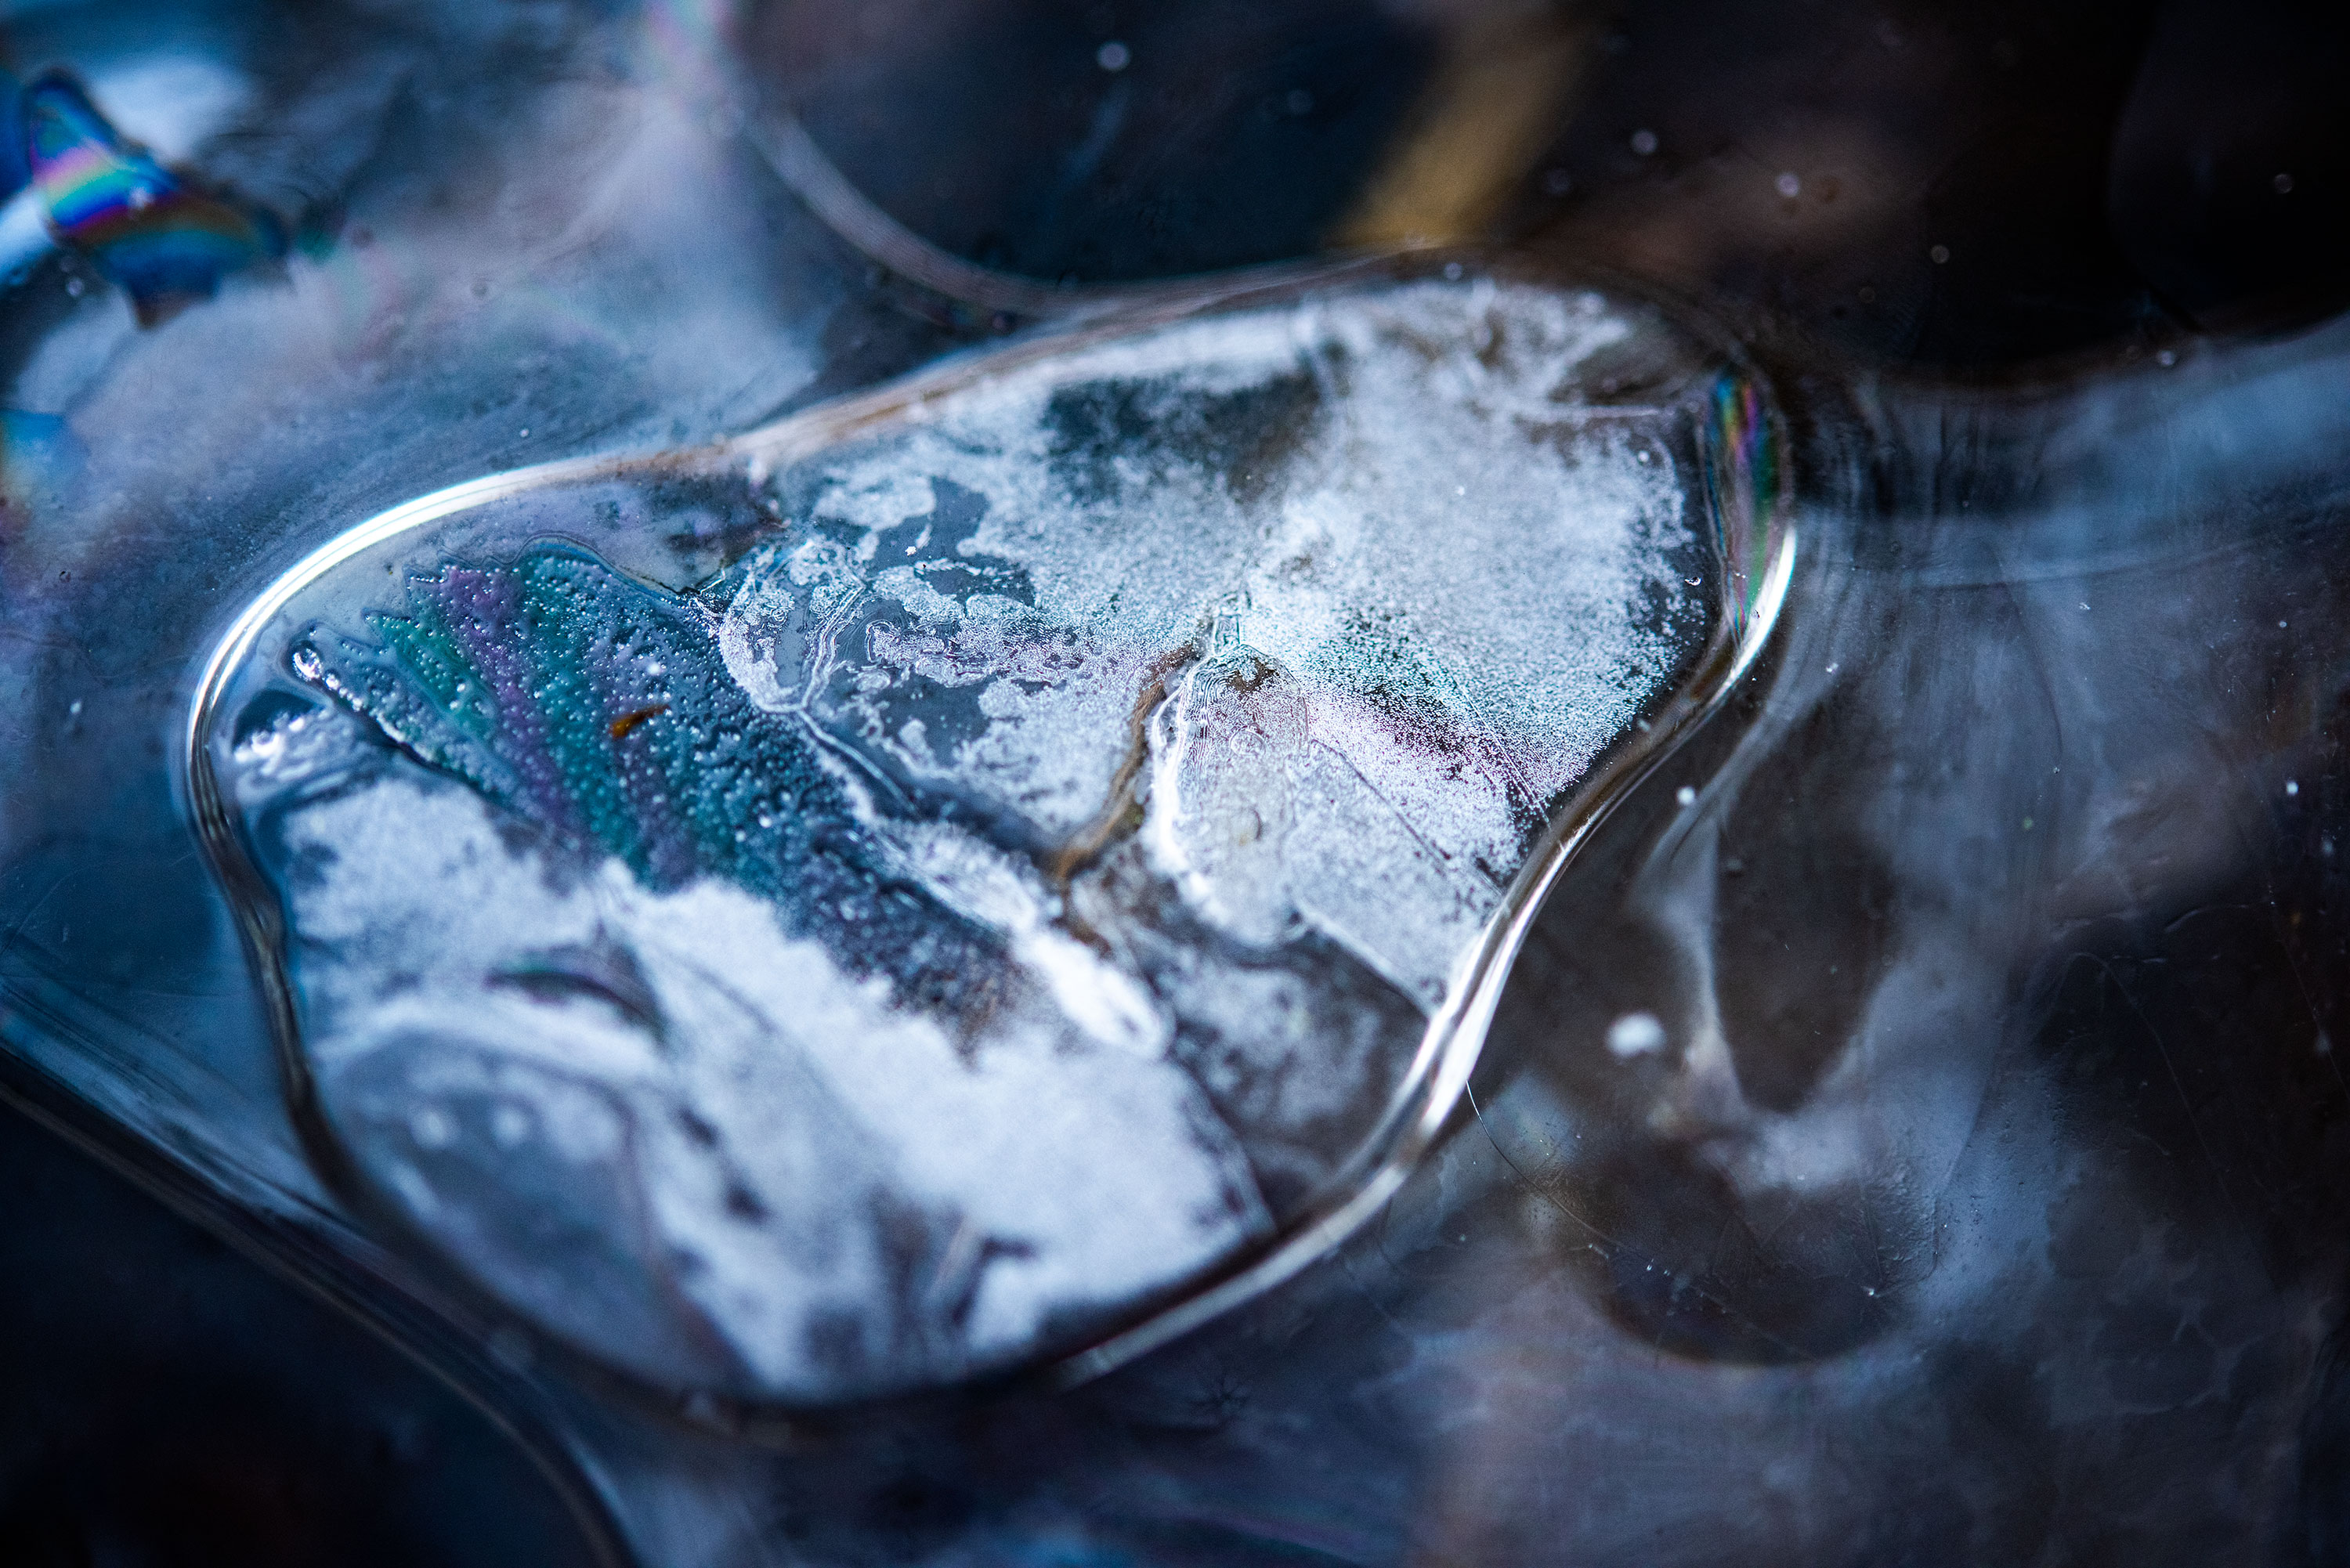 Abstract and close up photography of a frozen pond, located in Lausanne, Switzerland. Image by Jennifer Esseiva.